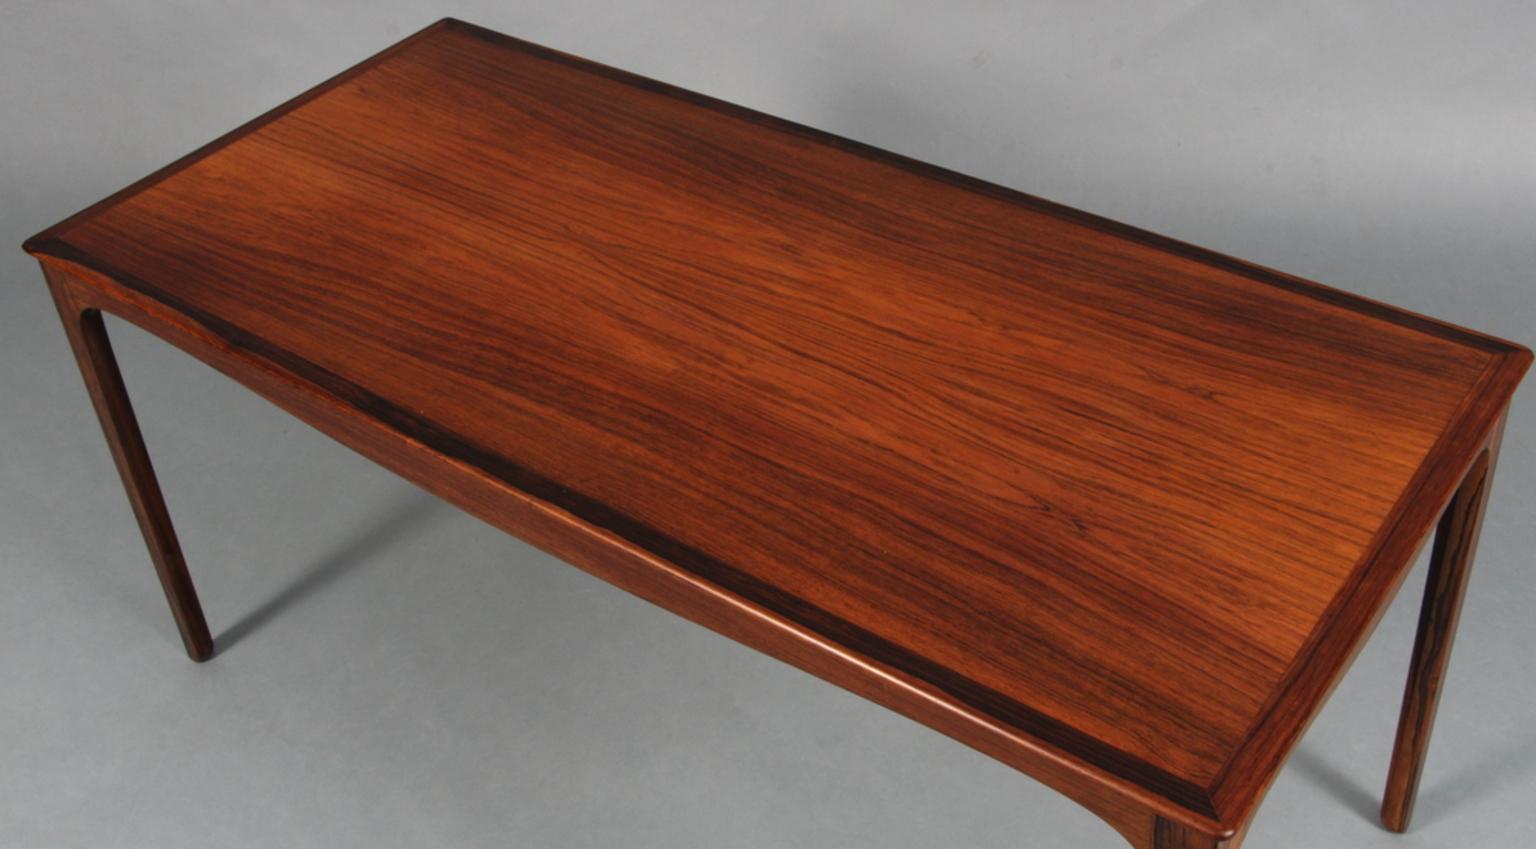 Ole Wanscher coffee table made in rosewood.

Manufactured by A. J. Iversen.